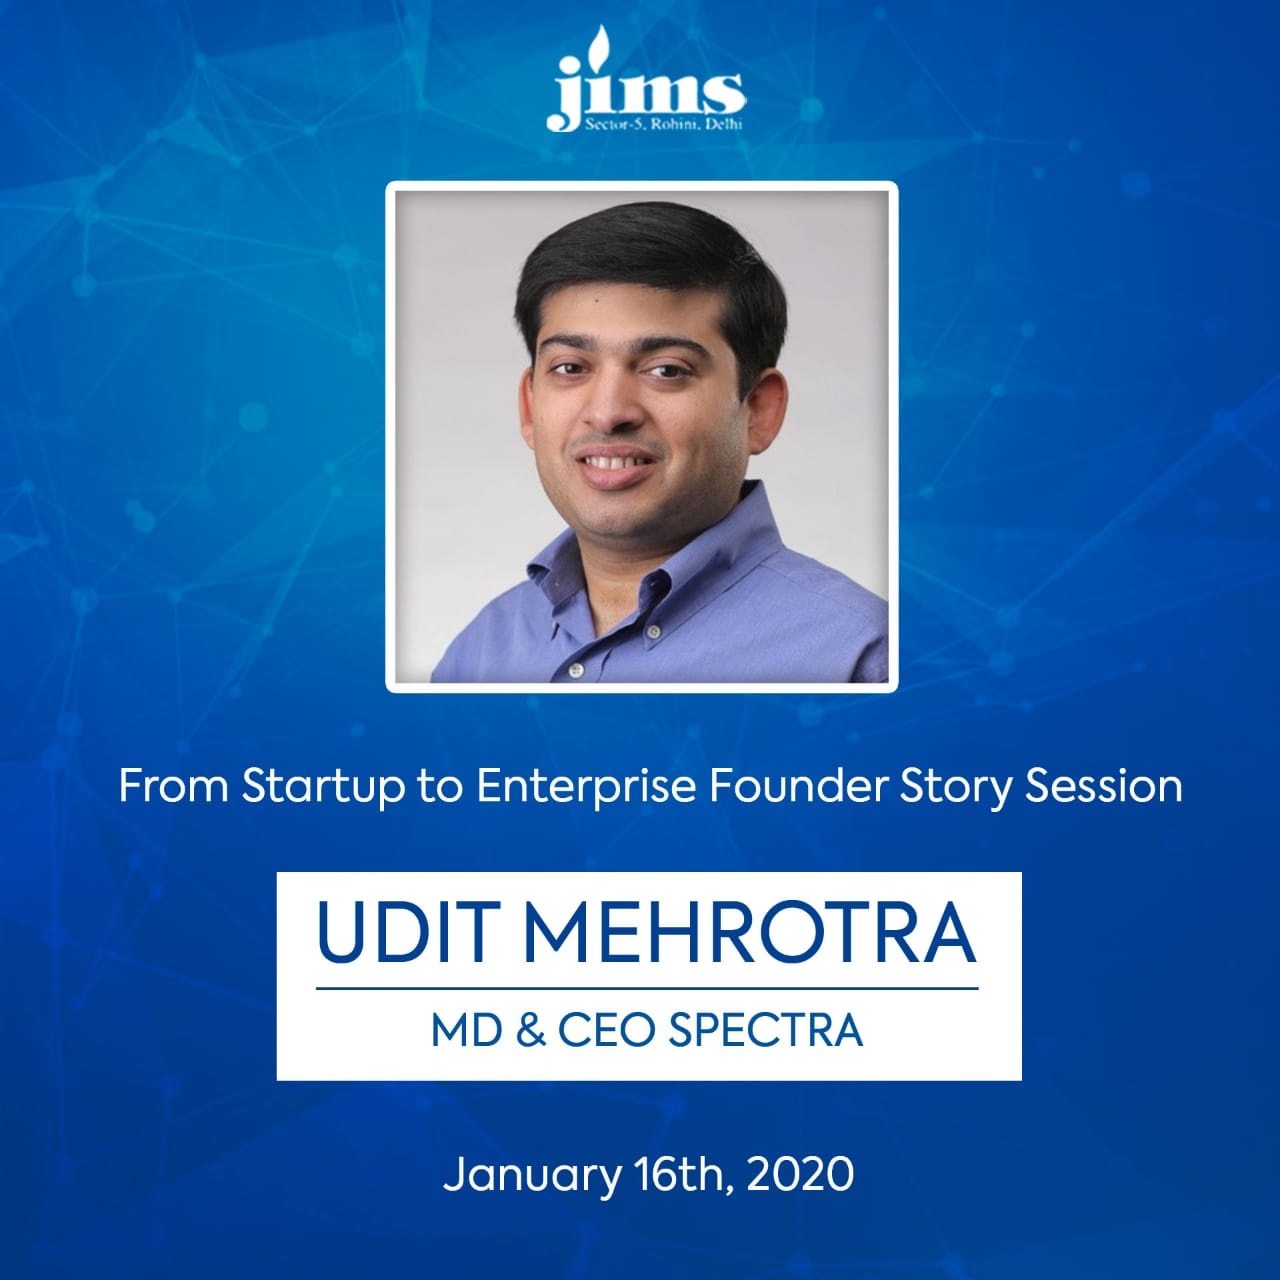 JIMS Rohini organizing a founder story Session by Mr Udit Mehrotra, Managing Director & CEO of Spectra